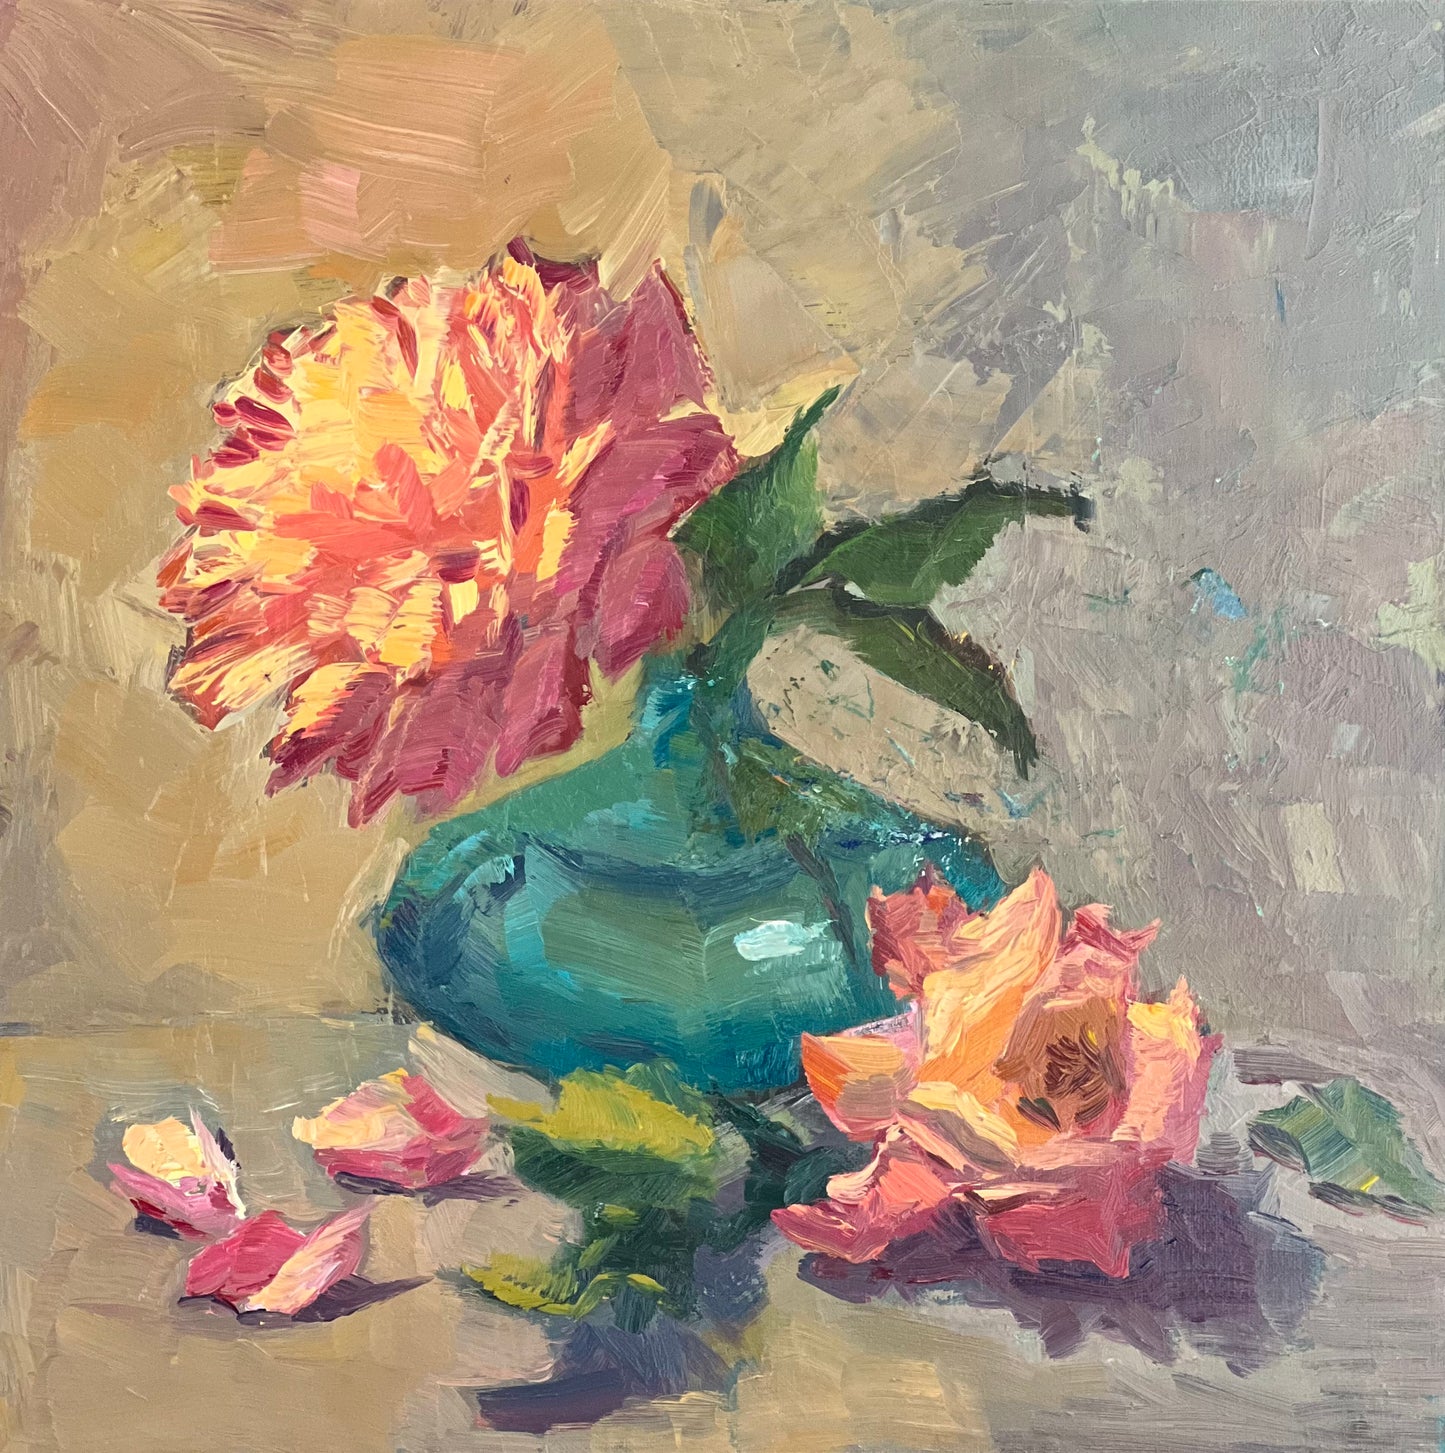 Large Oil Painting of Roses - Blue and Orange!